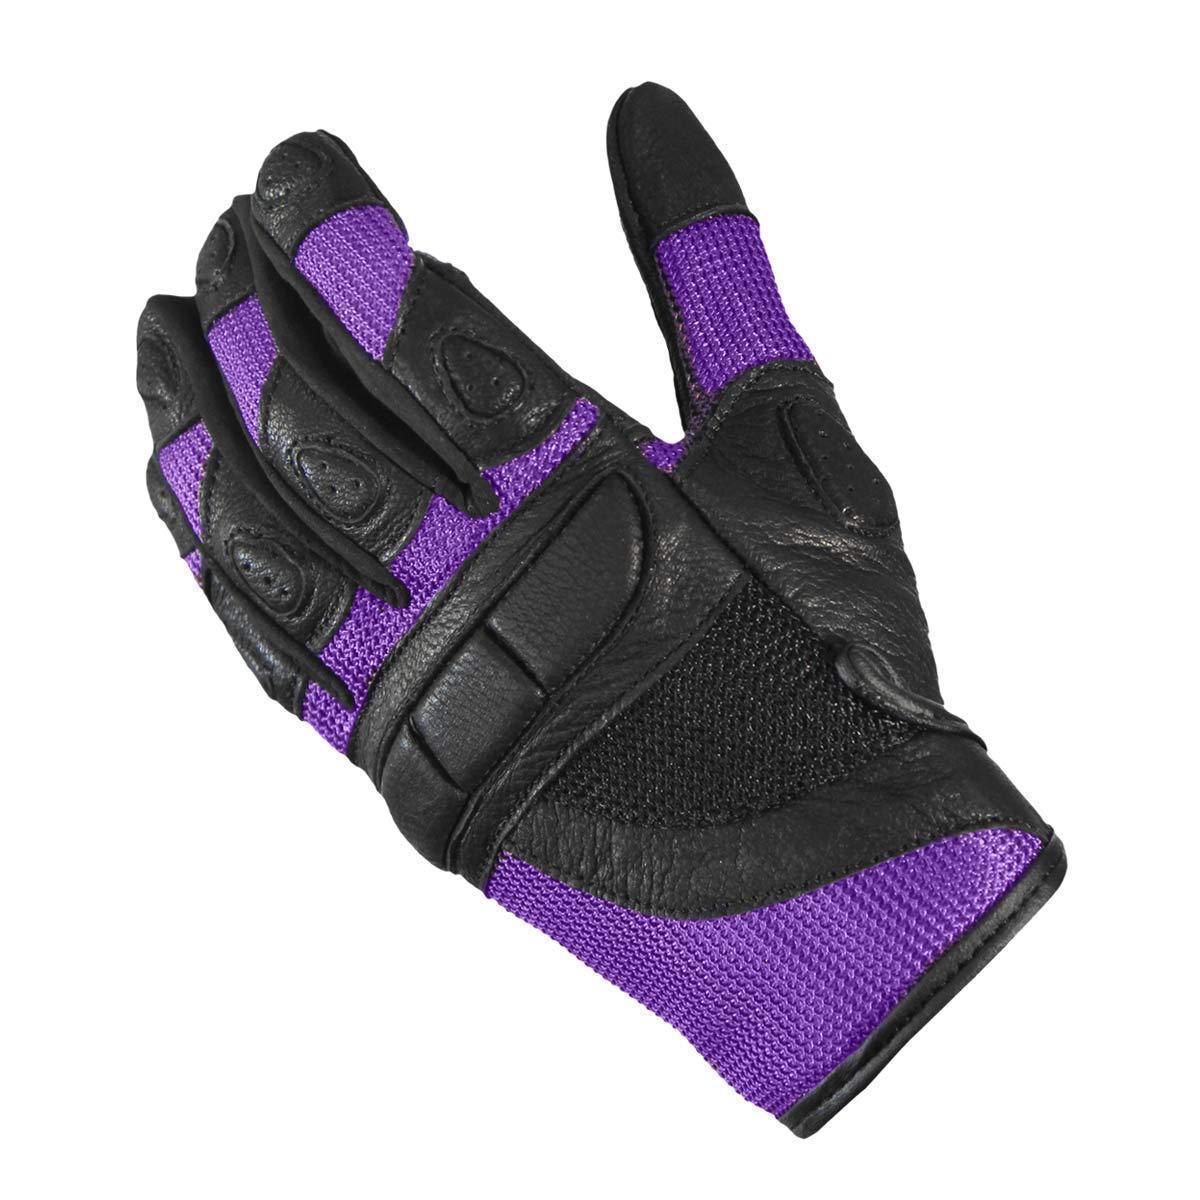 Xelement XG80208 Women's Black and Purple Mesh Cool Rider Motorcycle Gloves